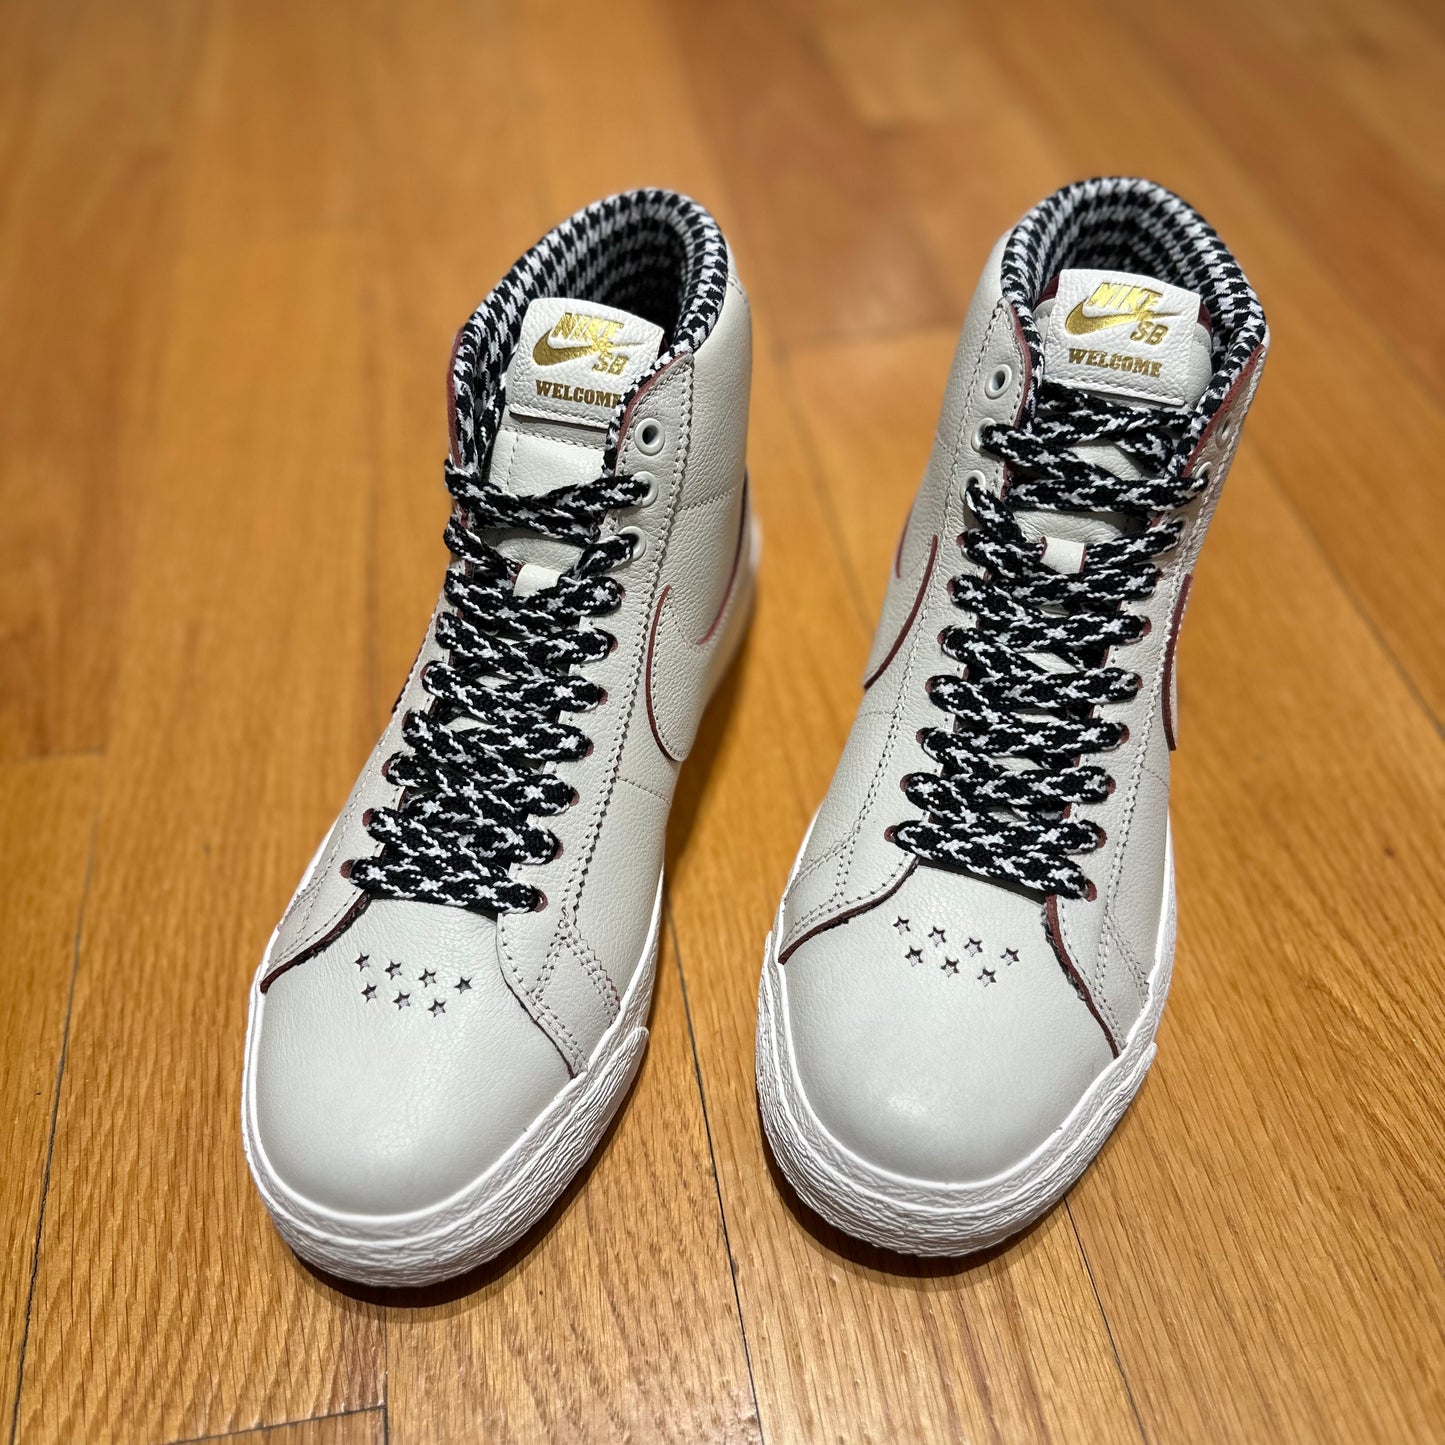 ZOOM BLAZER MID QS (WELCOME STORE)